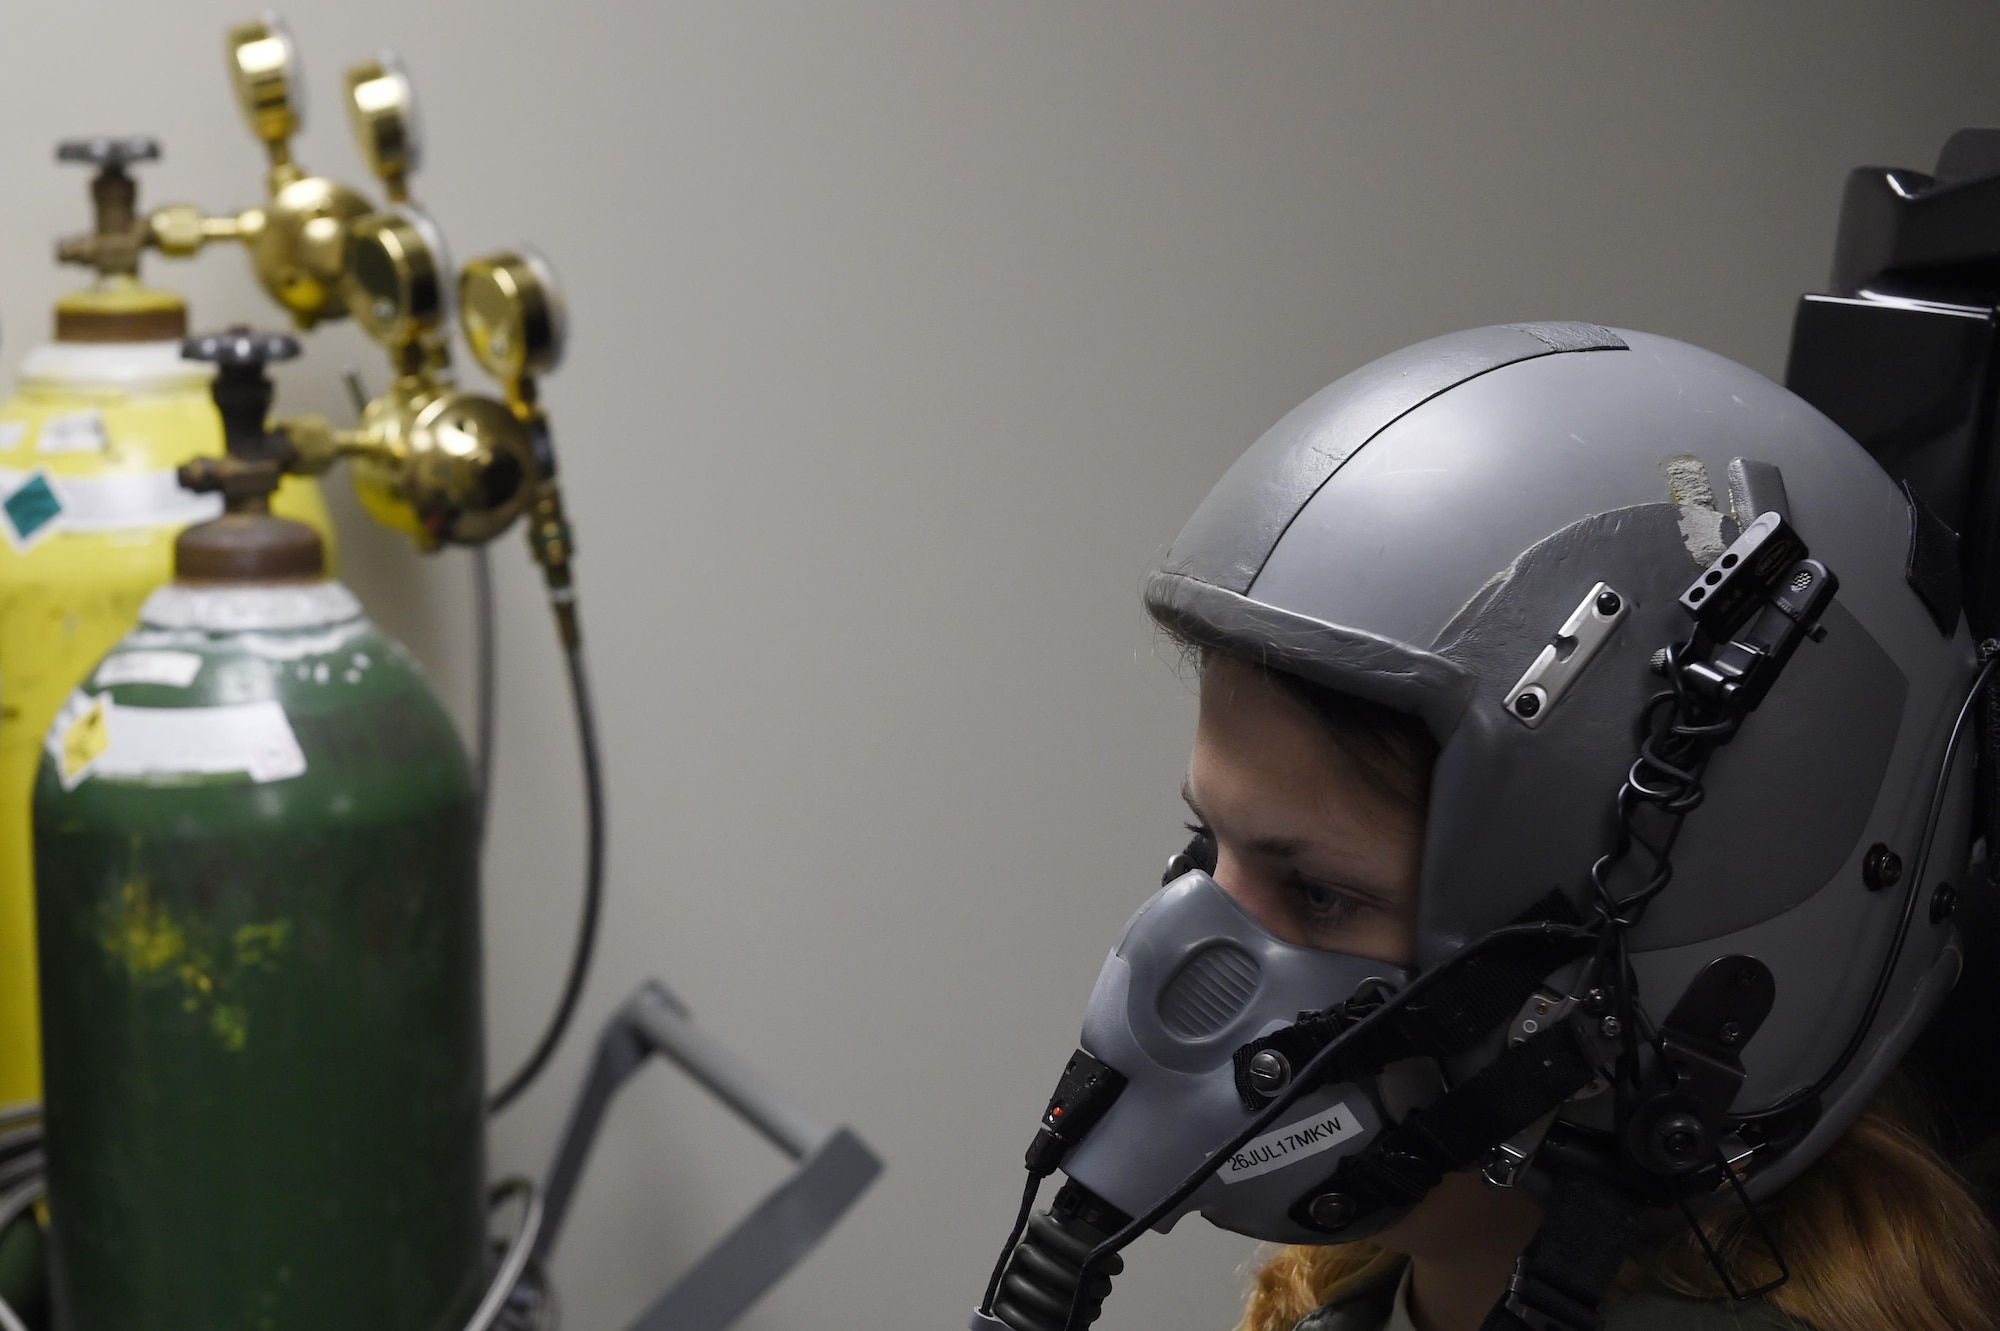 Staff Sgt. Katherine Stanton, 15th Airlift Squadron loadmaster, completes one-on-one hypoxia training in the Reduced Oxygen Breathing Device and Hypoxia Familiarization Trainer. For the training, Airmen fly a C-17 flight task simulation as the ROBD precisely mixes nitrogen and reduced oxygen to equivalent oxygen concentrations at higher altitudes. This allows Airmen to see how hypoxia affects their motor skills and to experience their symptoms in a low risk environment. 